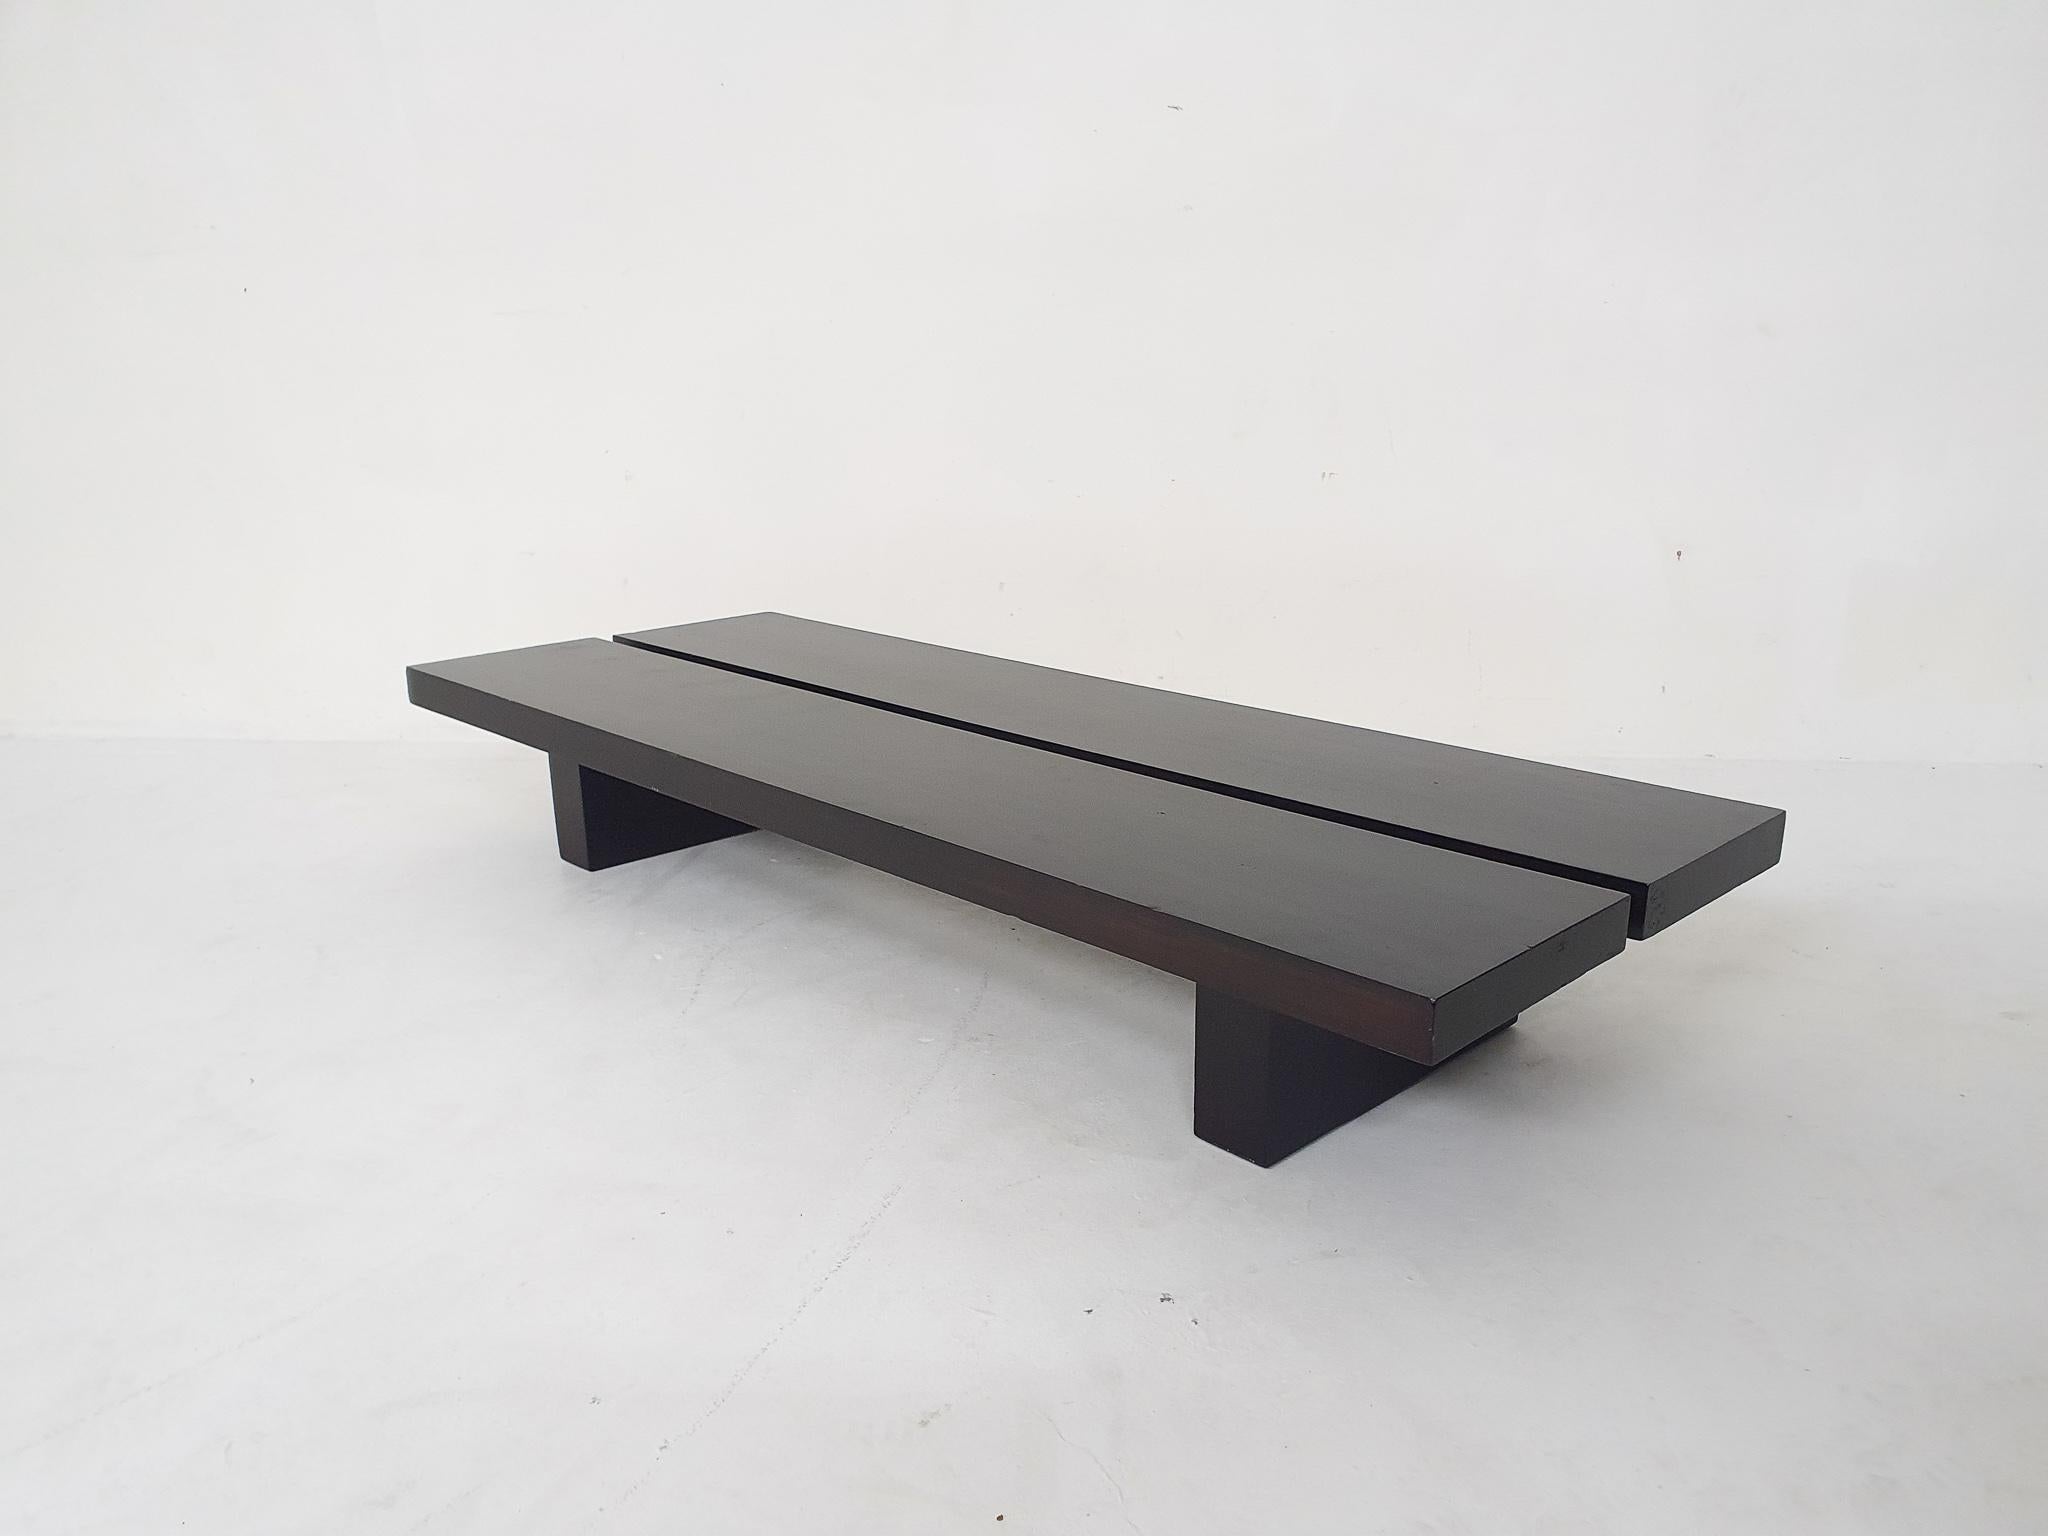 Solid wooden bench or coffee table. Wabi sabi, japandi style.
With beautiful joints.